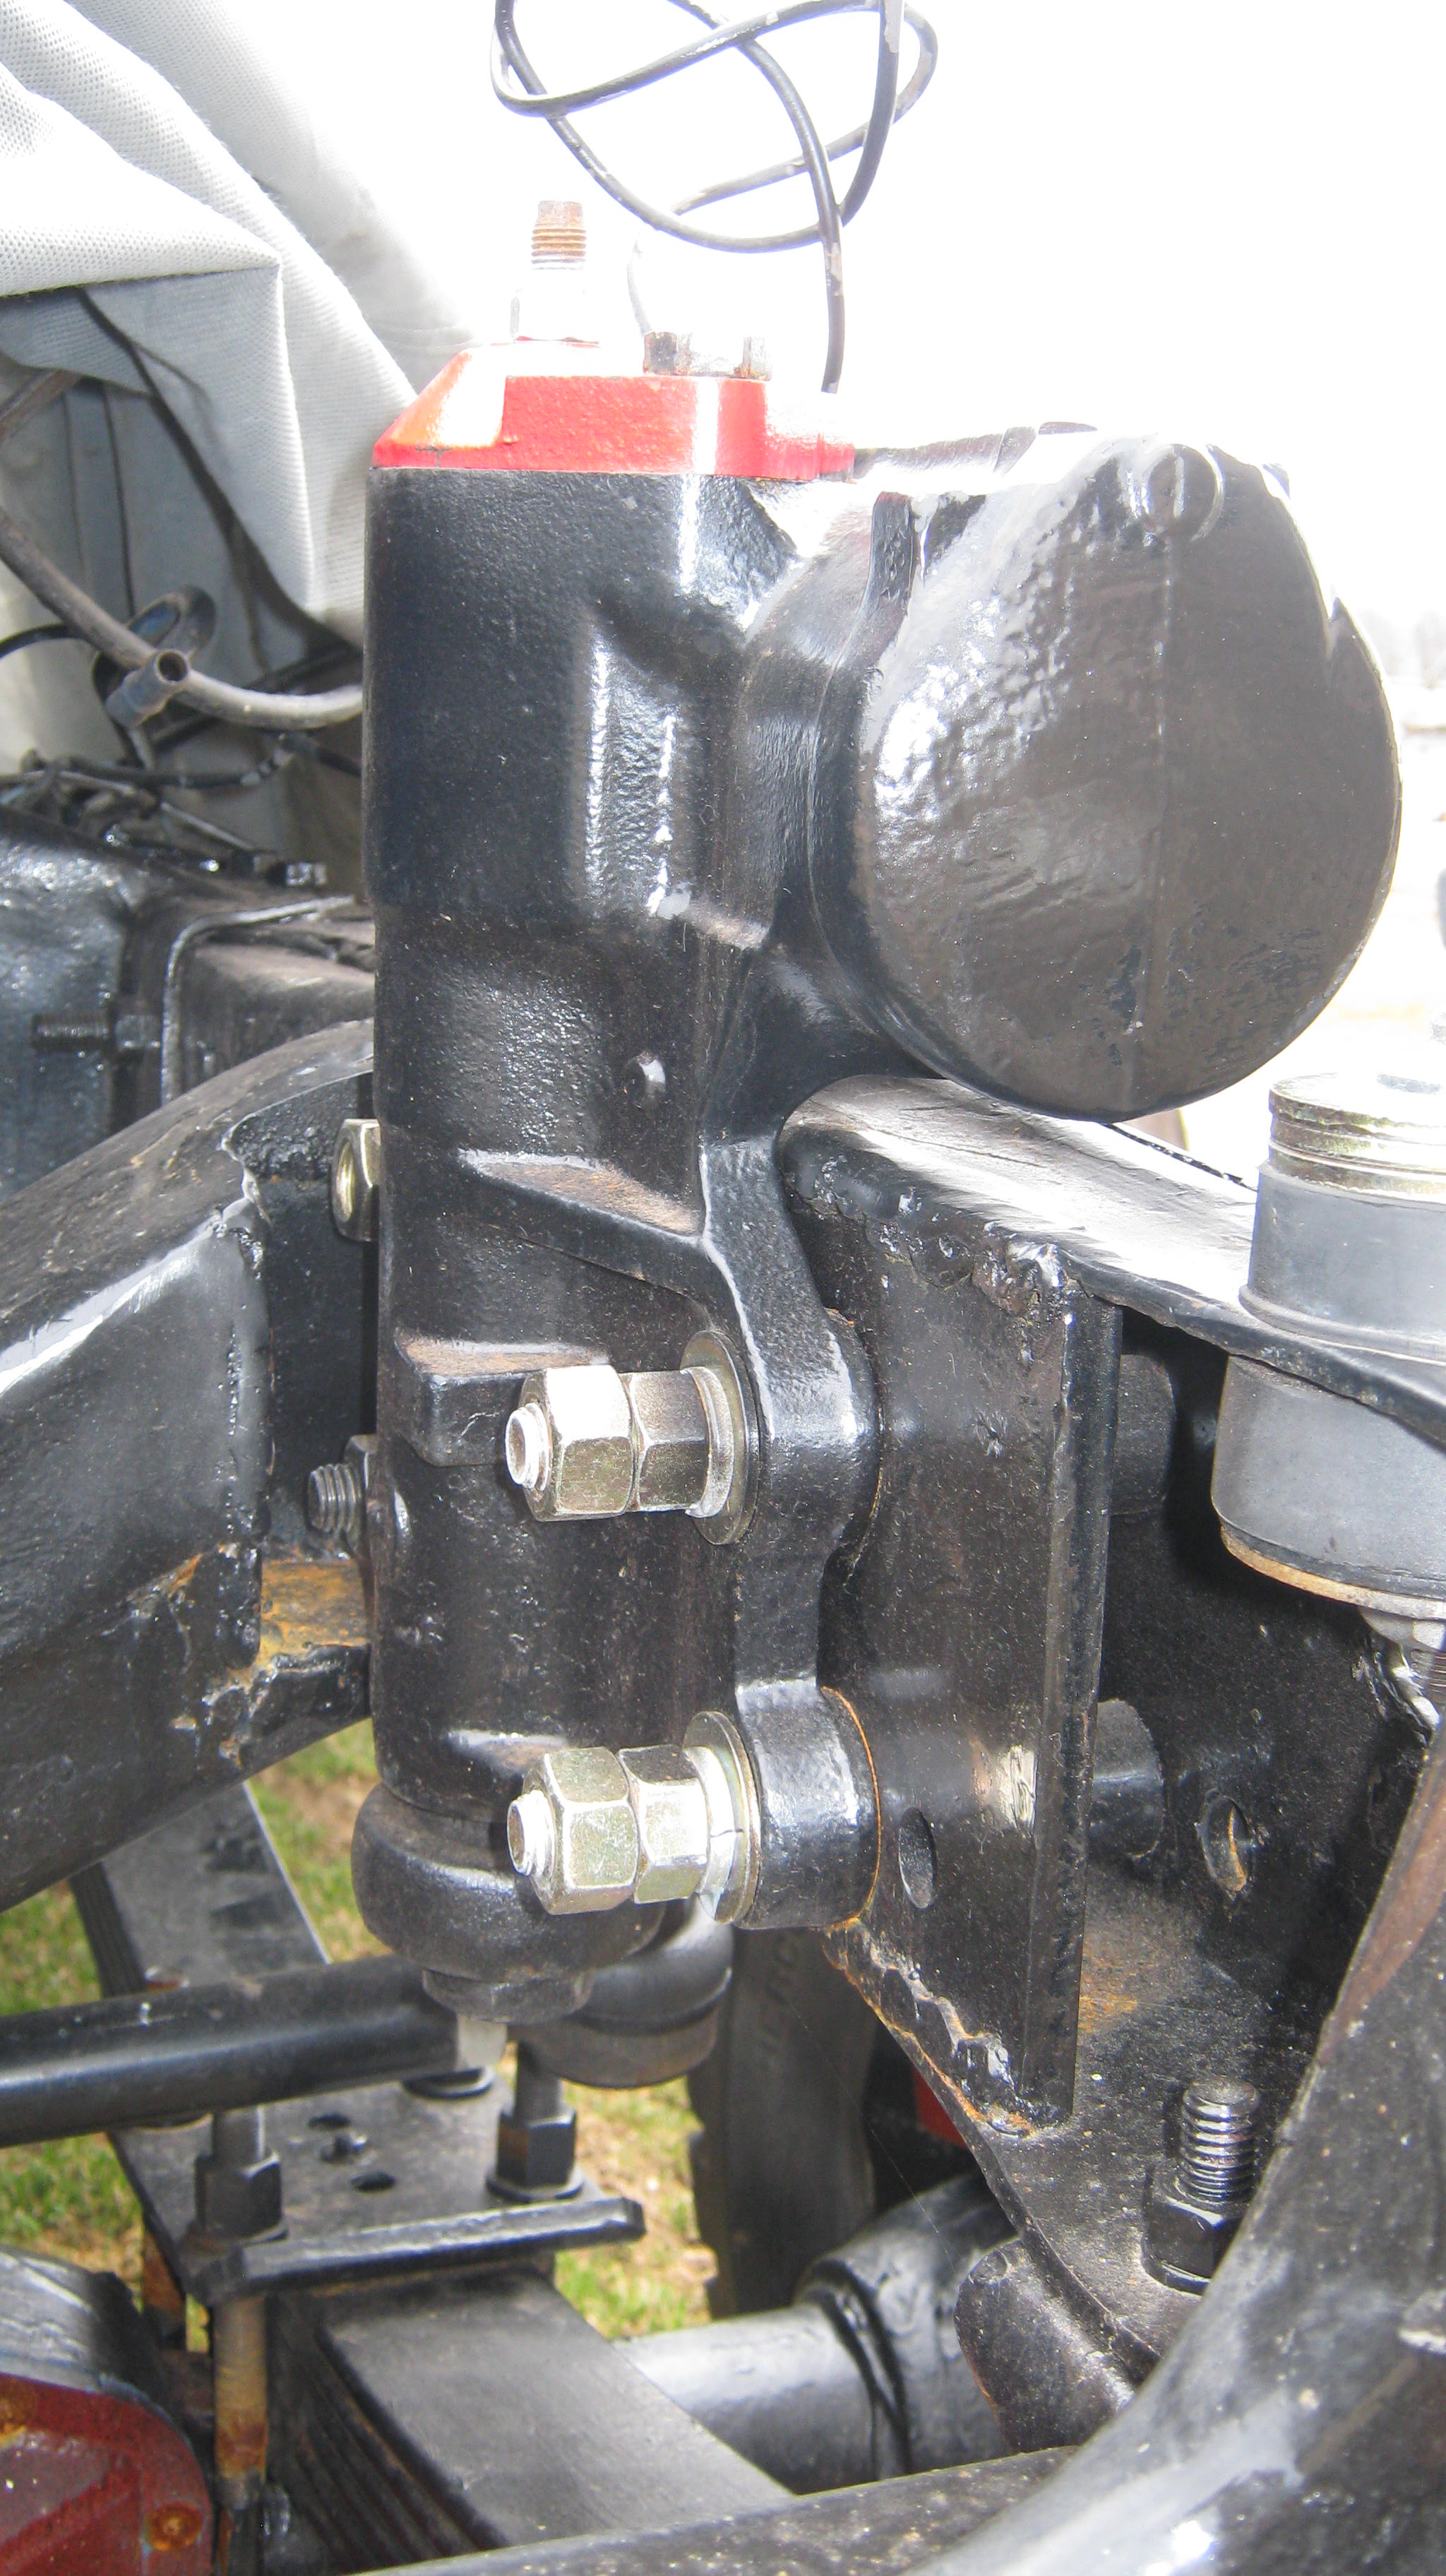 Highboy power steering conversion - Ford Truck Enthusiasts Forums 2004 Ford F250 Power Steering Problems